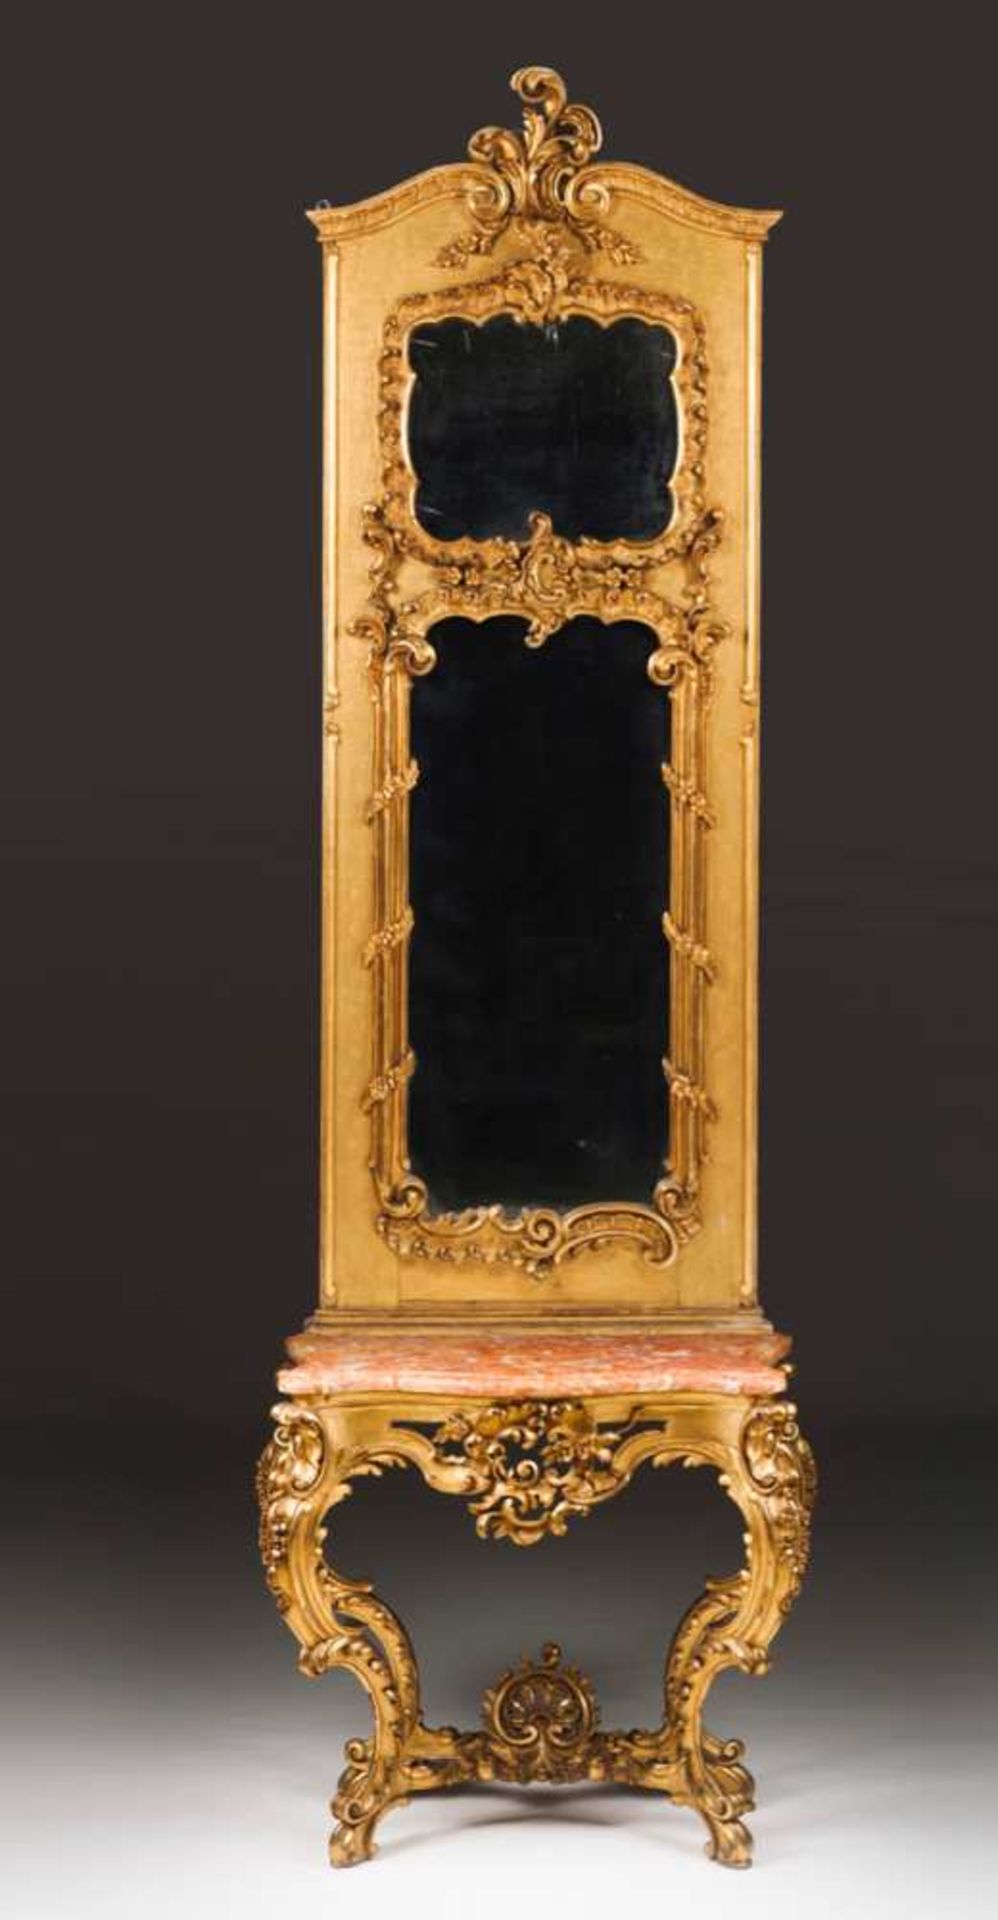 A Louis XV style pier table and mirror Carved and gilt wood decorated with strapwork, scrolls and